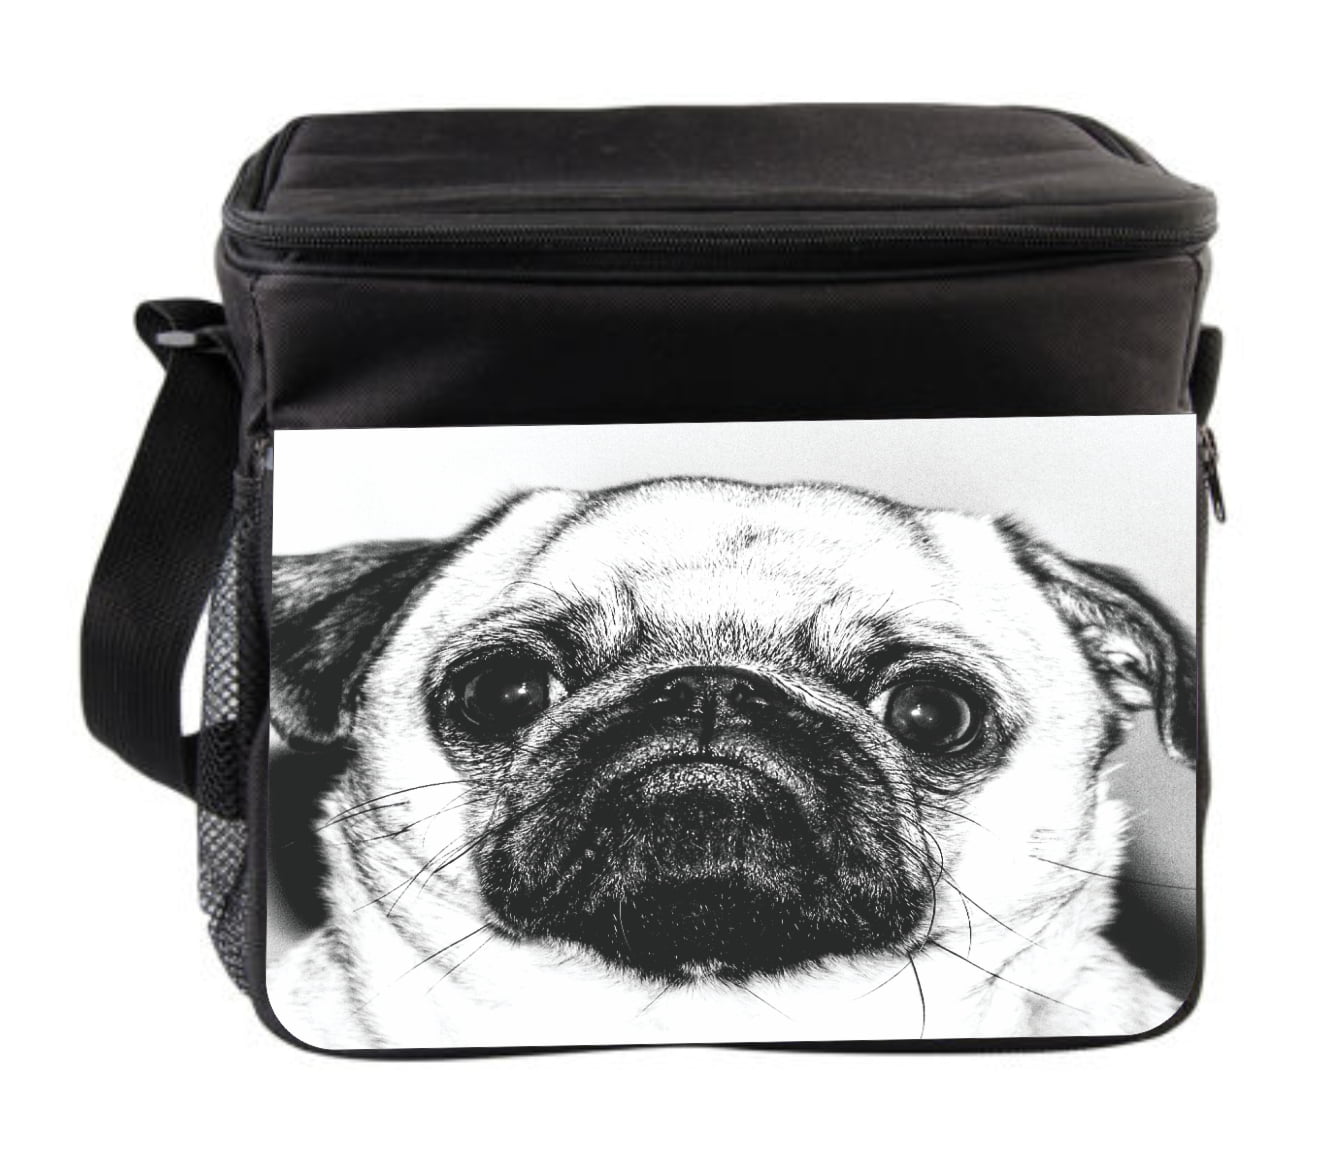 Cross Body Lunch Tote Bag~Insulated Cooler~Pug Puppy Dog~Lunchbox ~ Black~EUC 